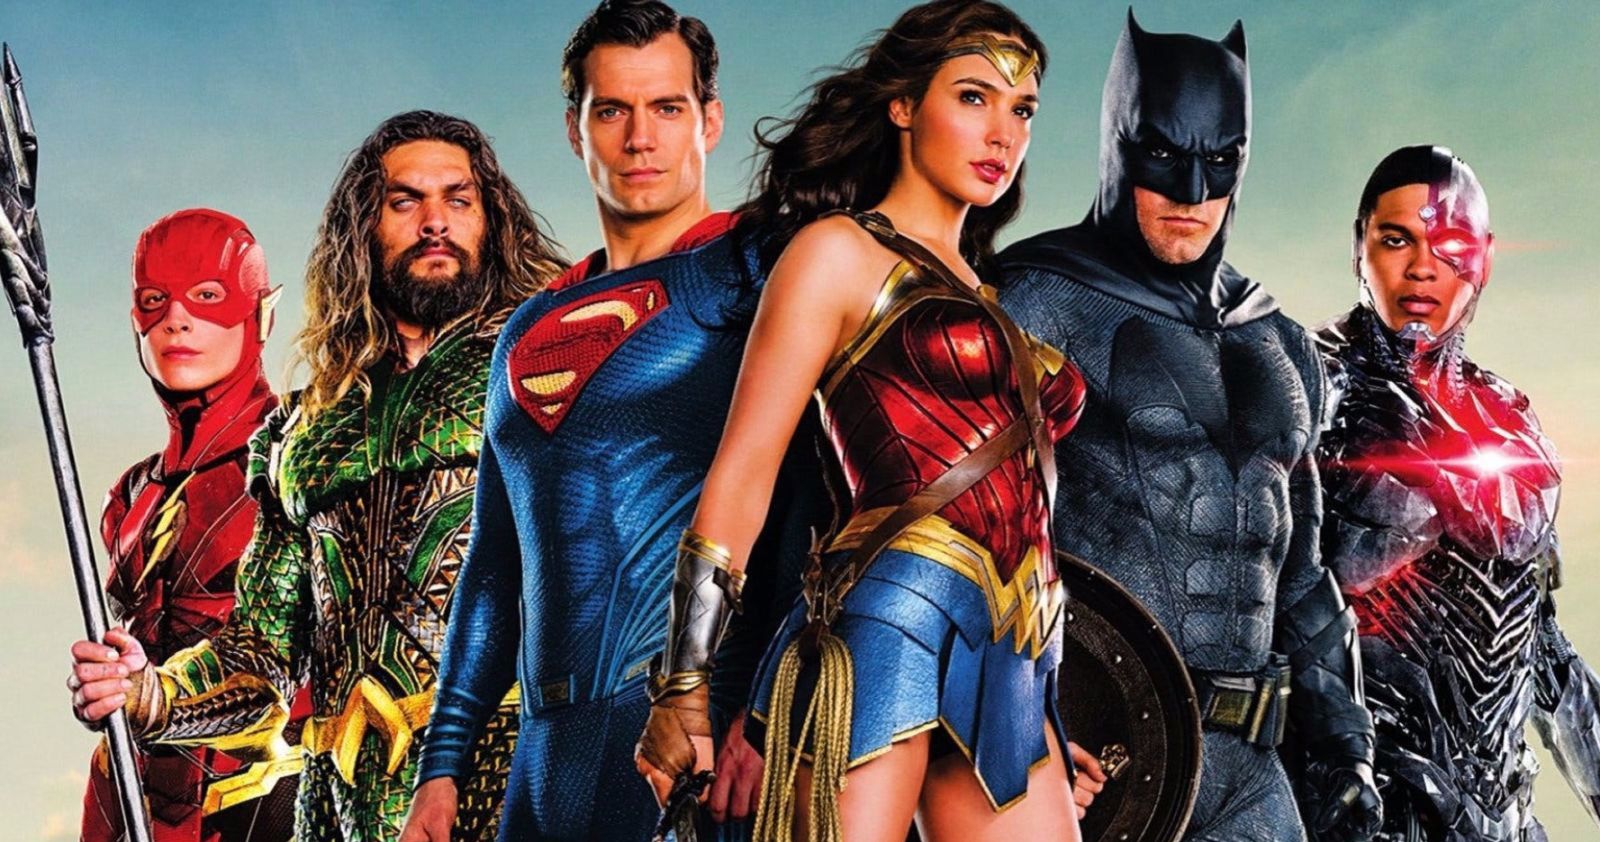 Justice League Snyder Cut Rumored to Have Screened, Is a Release Coming Soon?